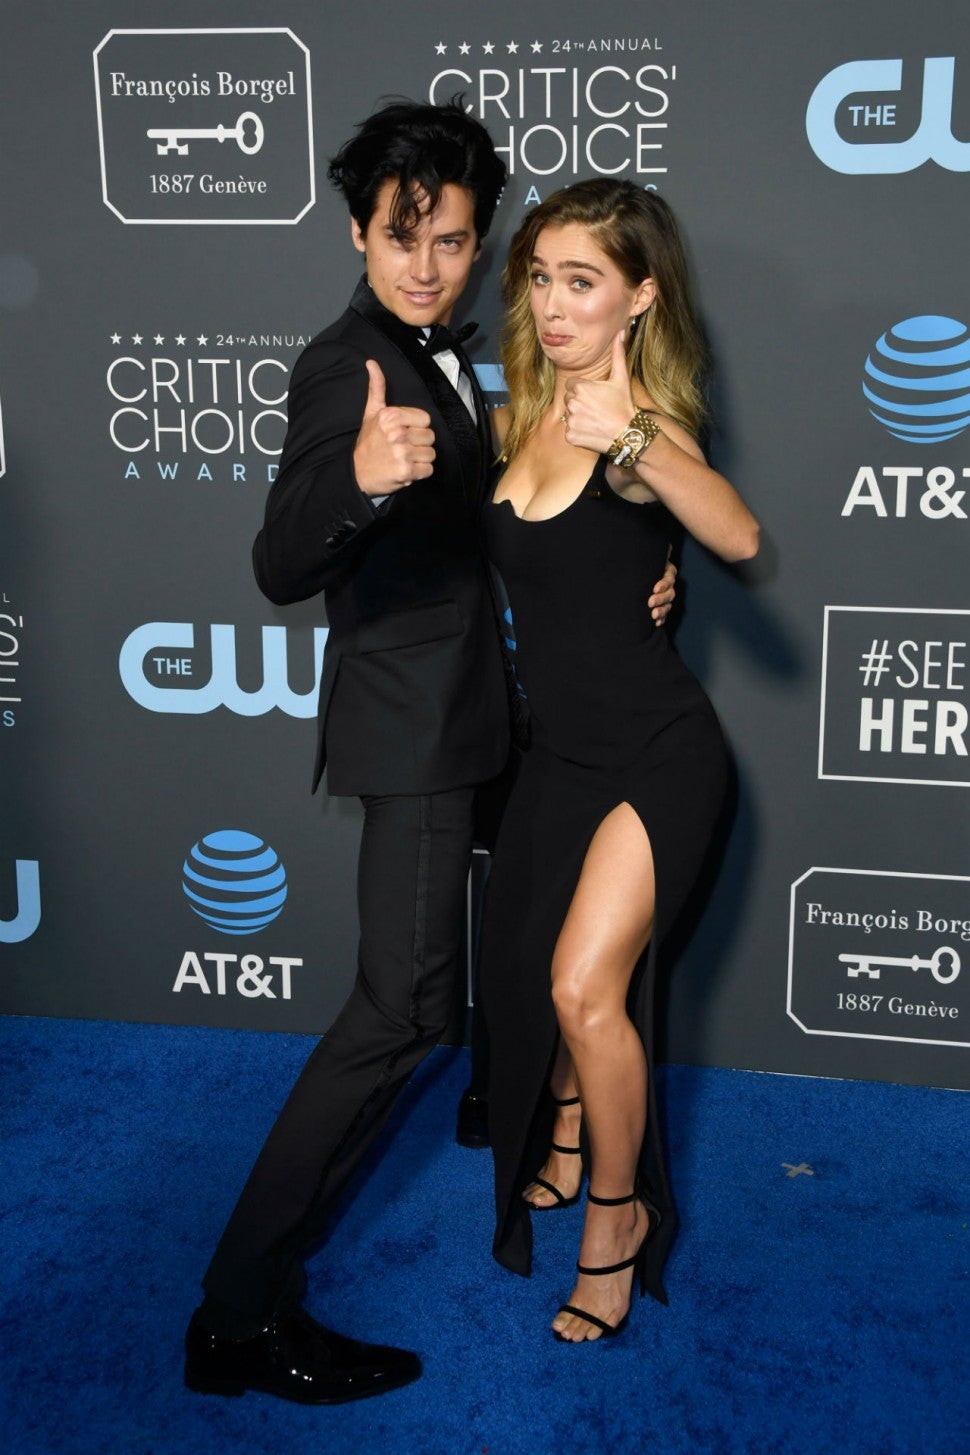 Cole Sprouse and Haley Lu Richardson